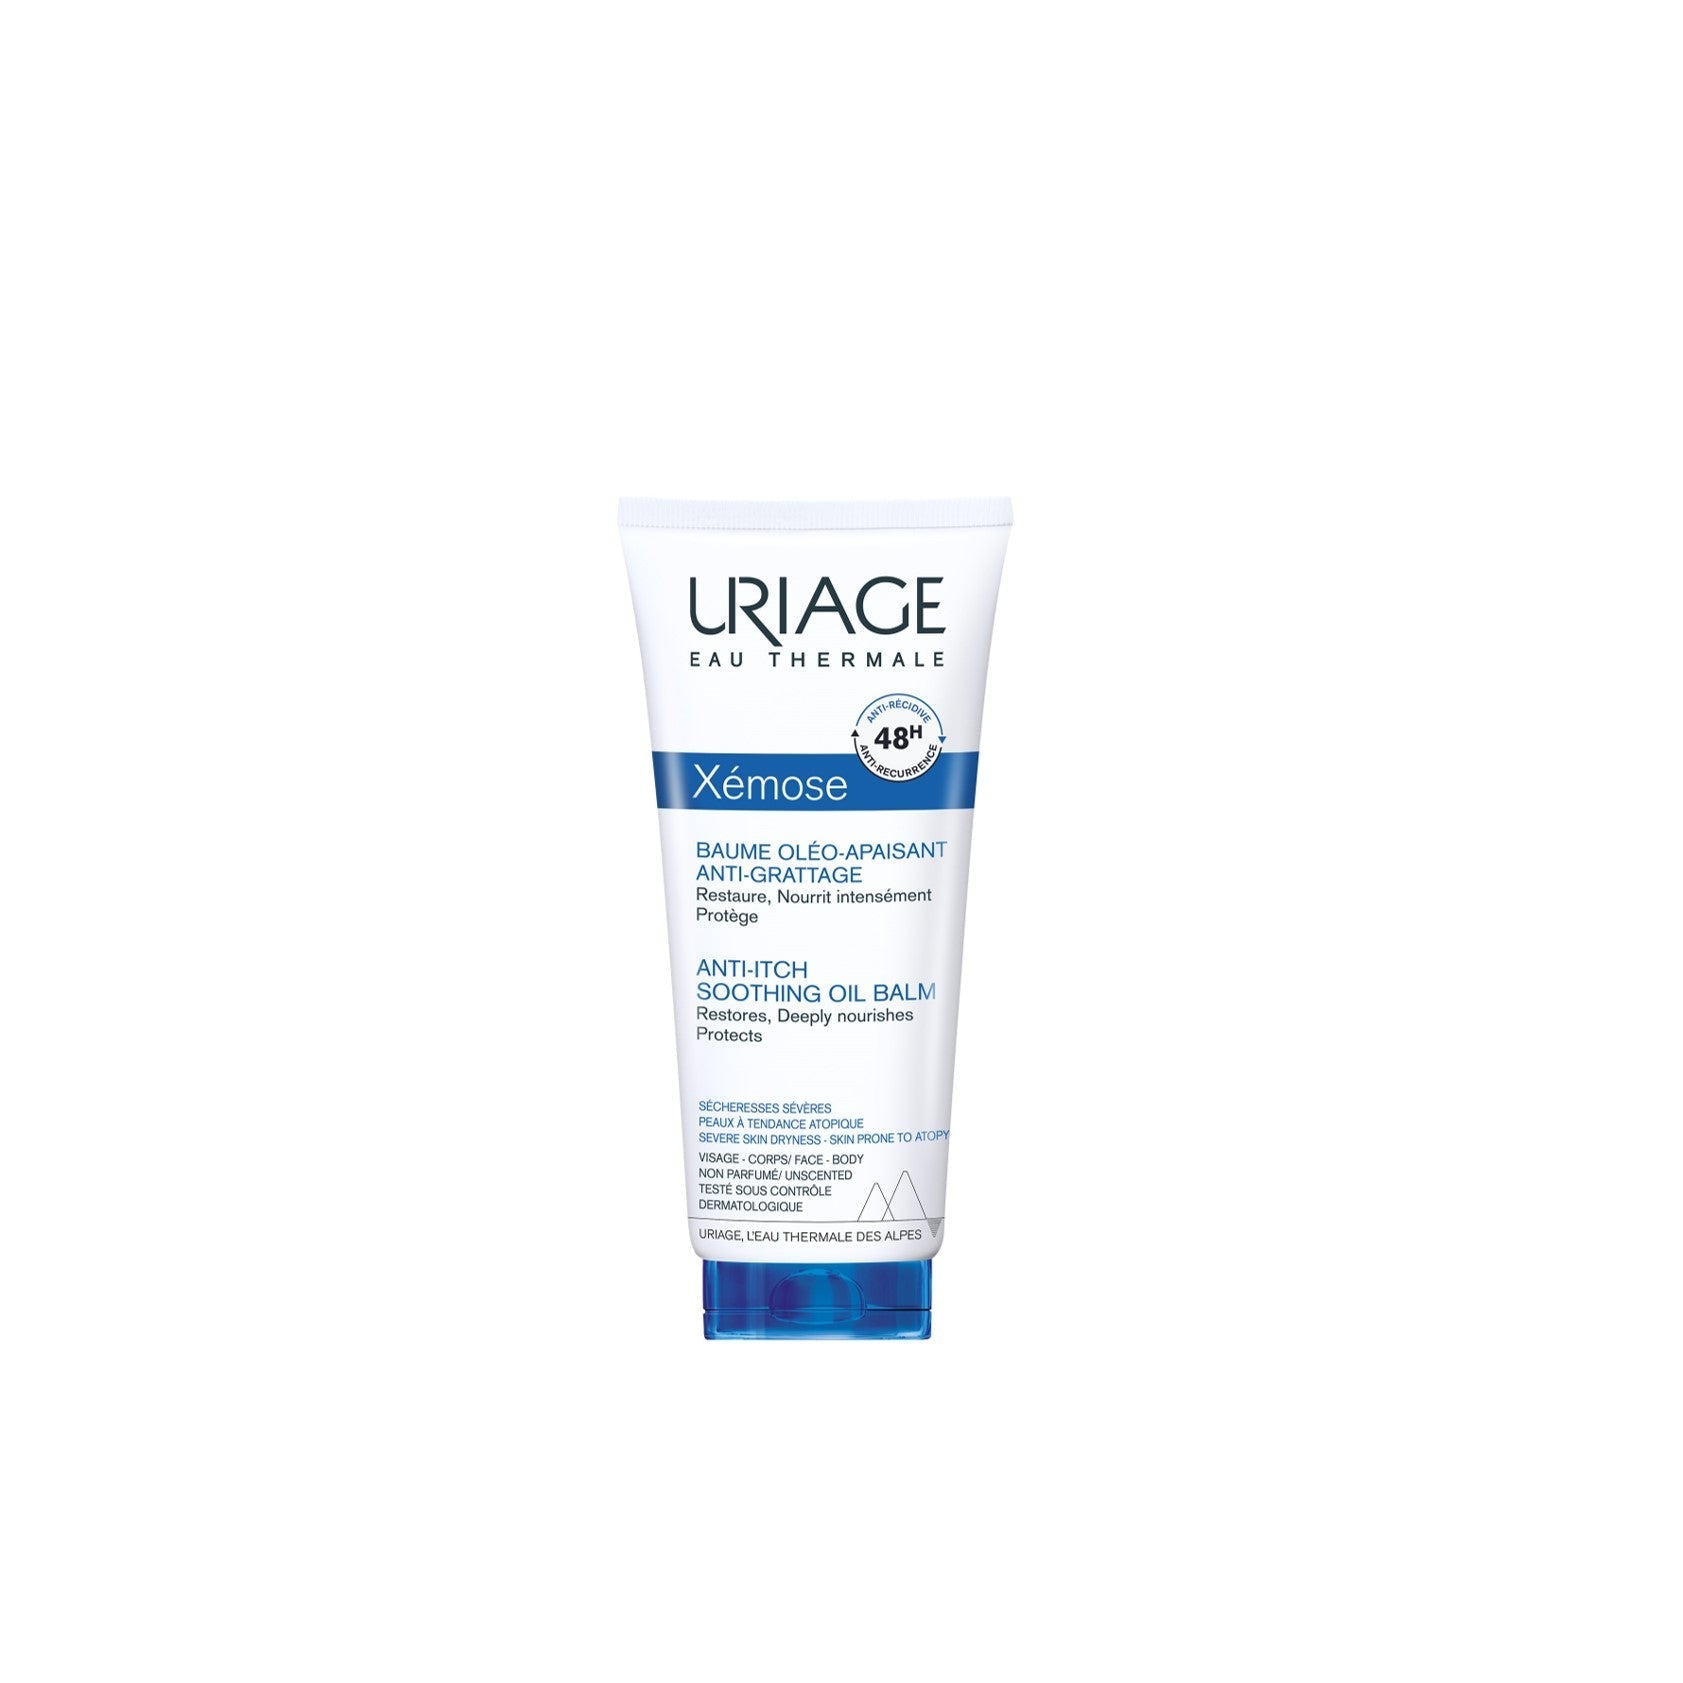 Uriage Xemose  Anti-Itch Soothing Oil Balm 200ml